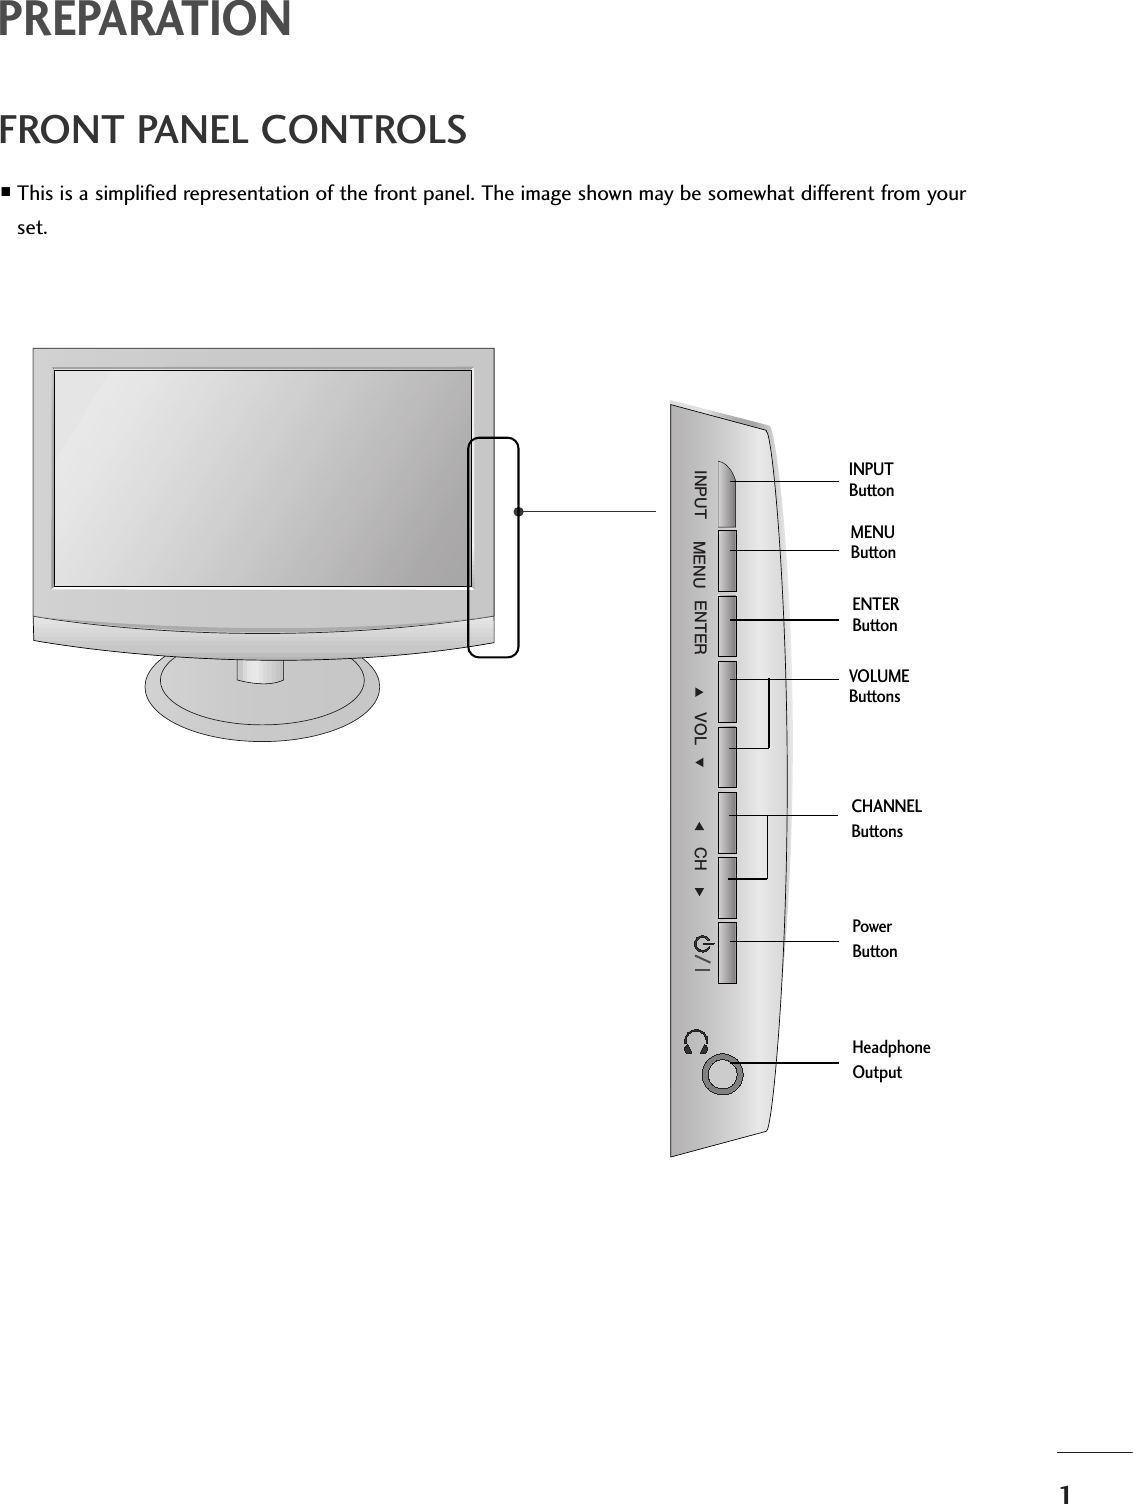 1PREPARATIONFRONT PANEL CONTROLS■This is a simplified representation of the front panel. The image shown may be somewhat different from yourset.INPUT MENU VOL CHENTERCHANNELButtonsVOLUMEButtonsMENUButtonENTERButtonINPUTButtonPowerButtonHeadphoneOutput